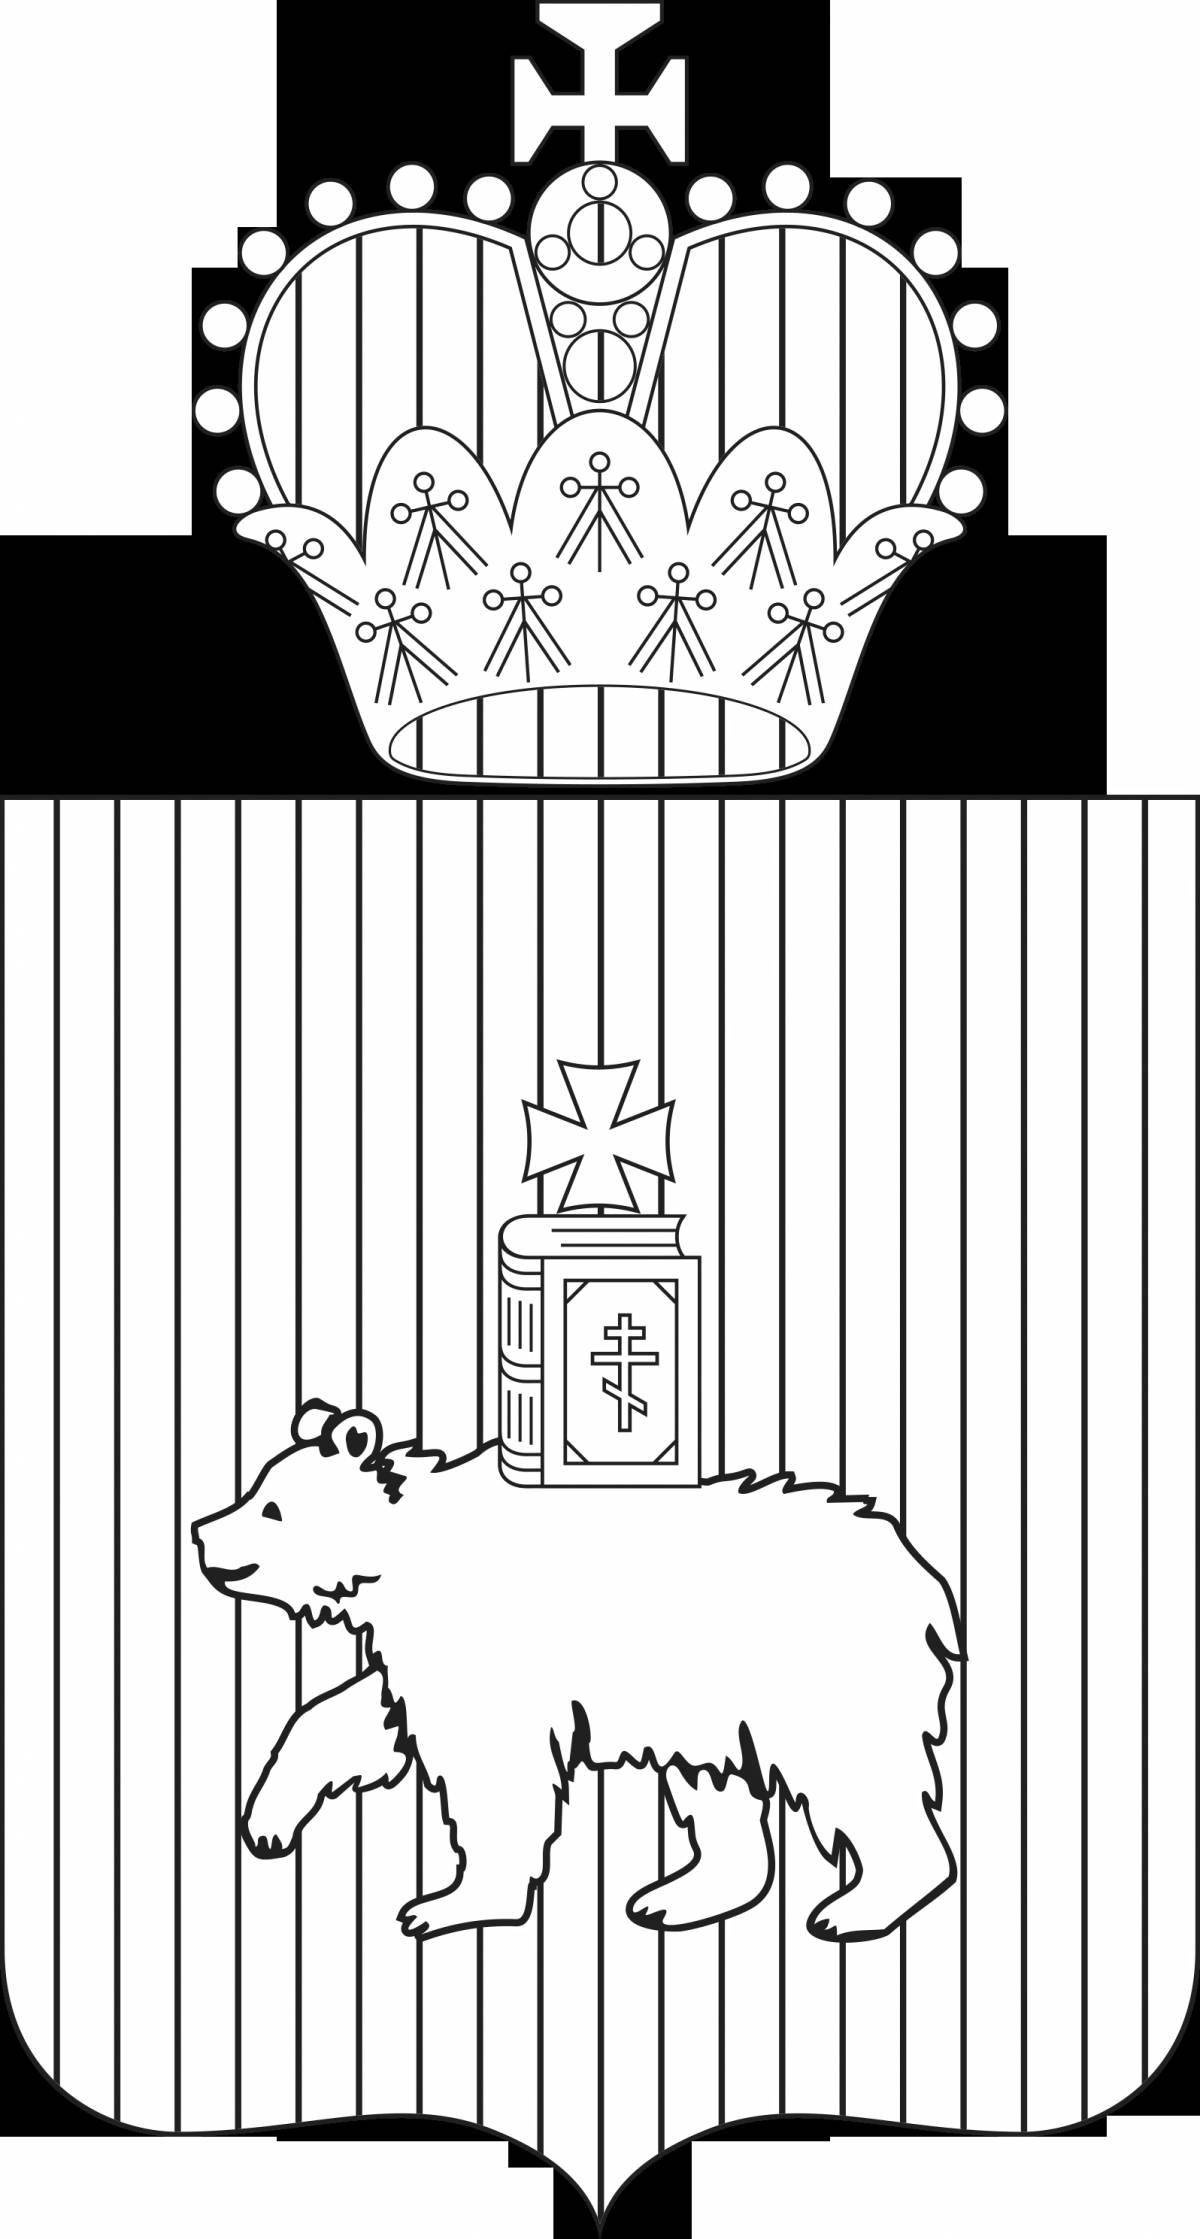 Coat of arms of Yekaterinburg #1